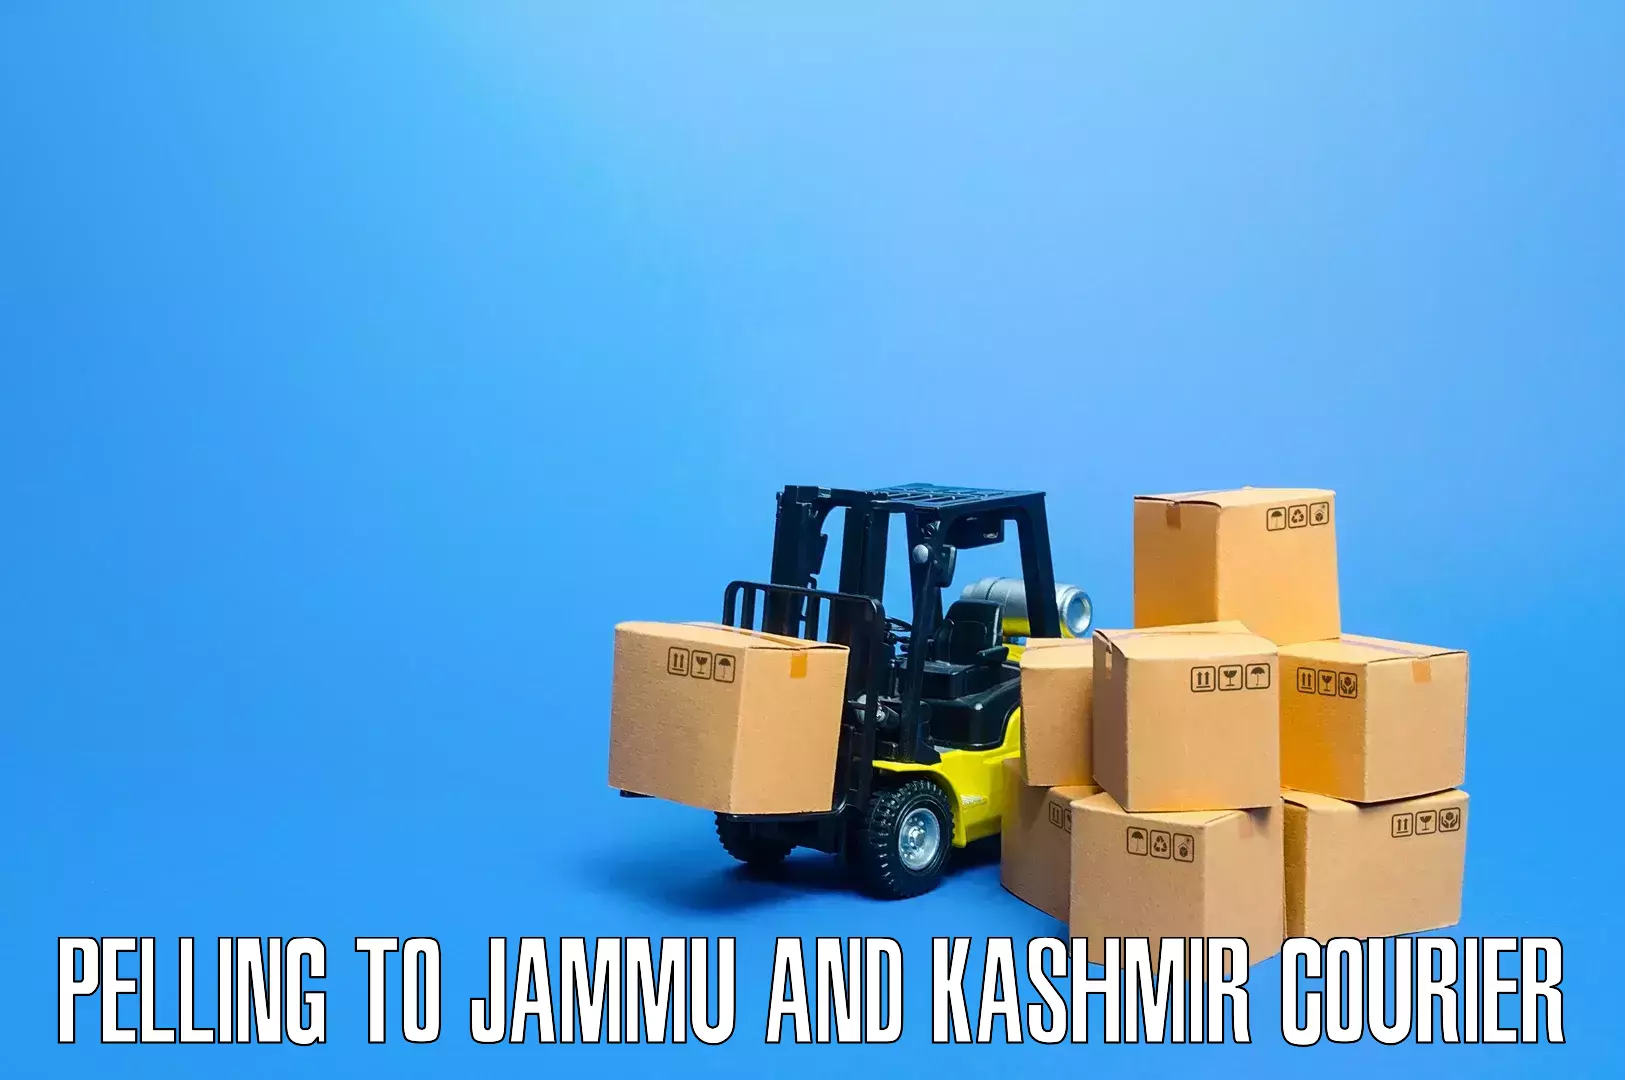 Moving and packing experts Pelling to Samba